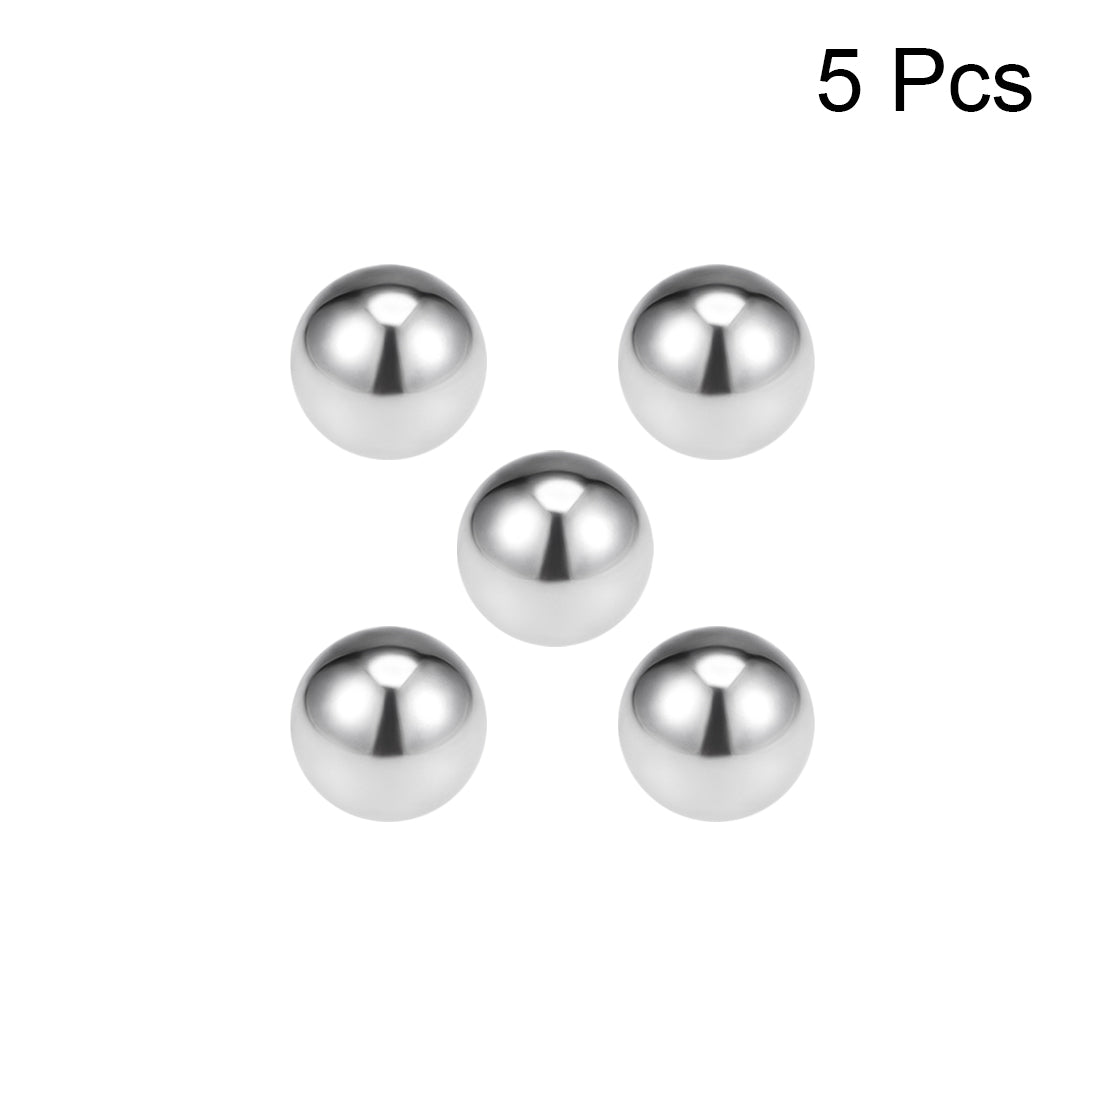 Uxcell Uxcell 20mm Bearing Balls 304 Stainless Steel G100 Precision Balls 5pcs